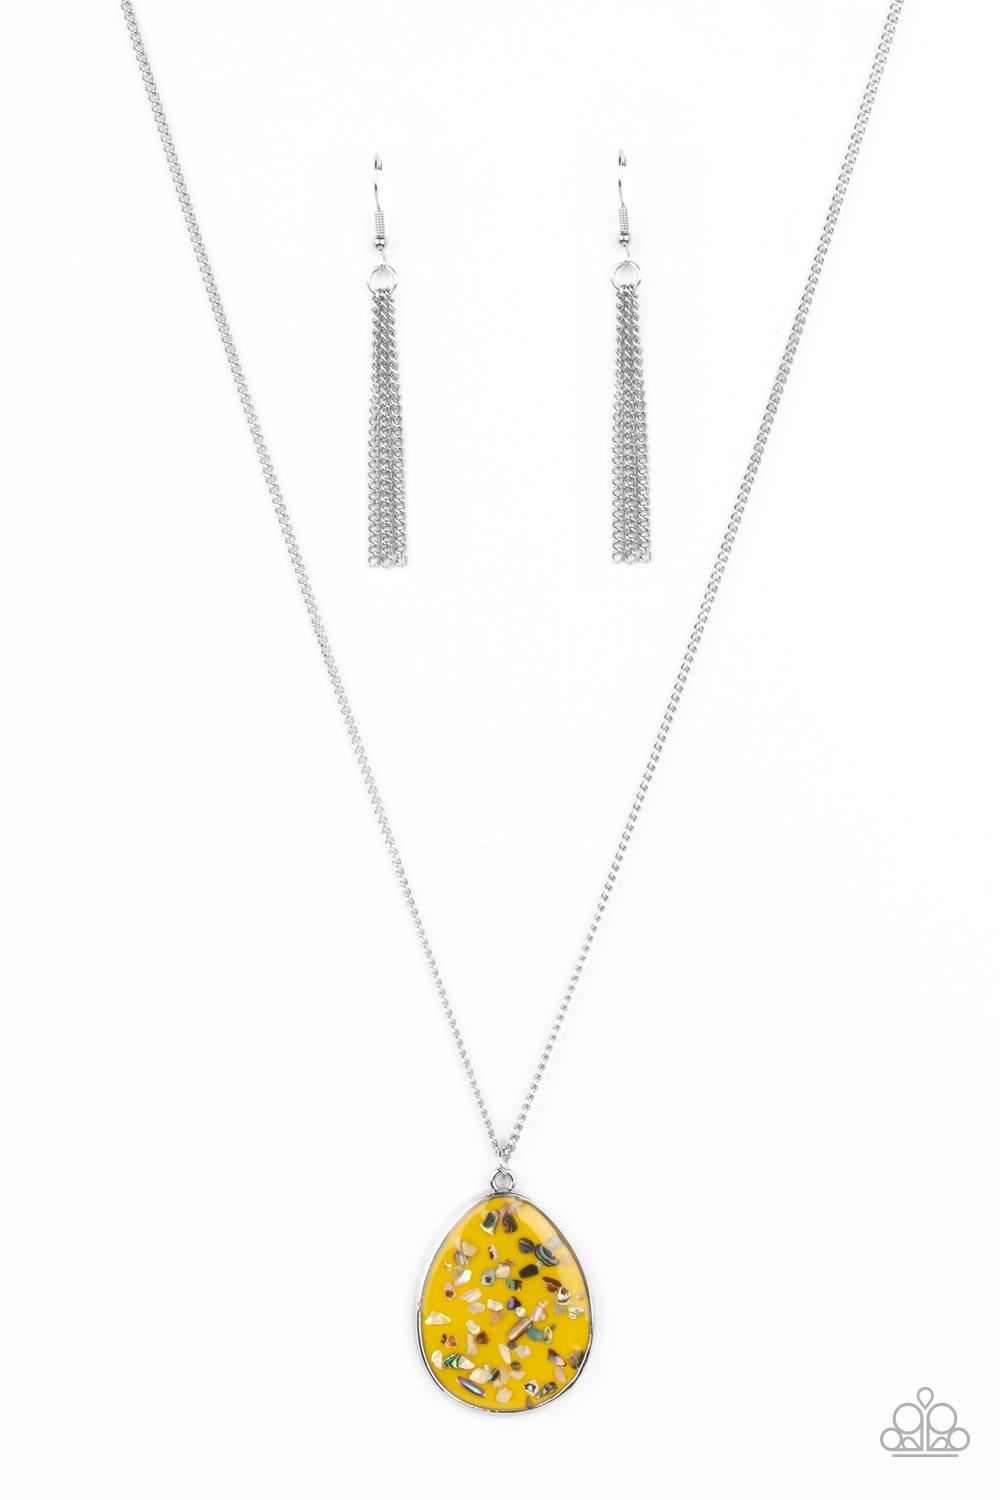 Shimmering Seafloors - Yellow and Silver Necklace - Paparazzi Accessories - Featuring a shell-like iridescence, shimmery flecks are sprinkled along a mustard yellow backdrop inside of a glassy casing. The colorful teardrop swings from the bottom of an extended silver chain, creating a summery pendant.